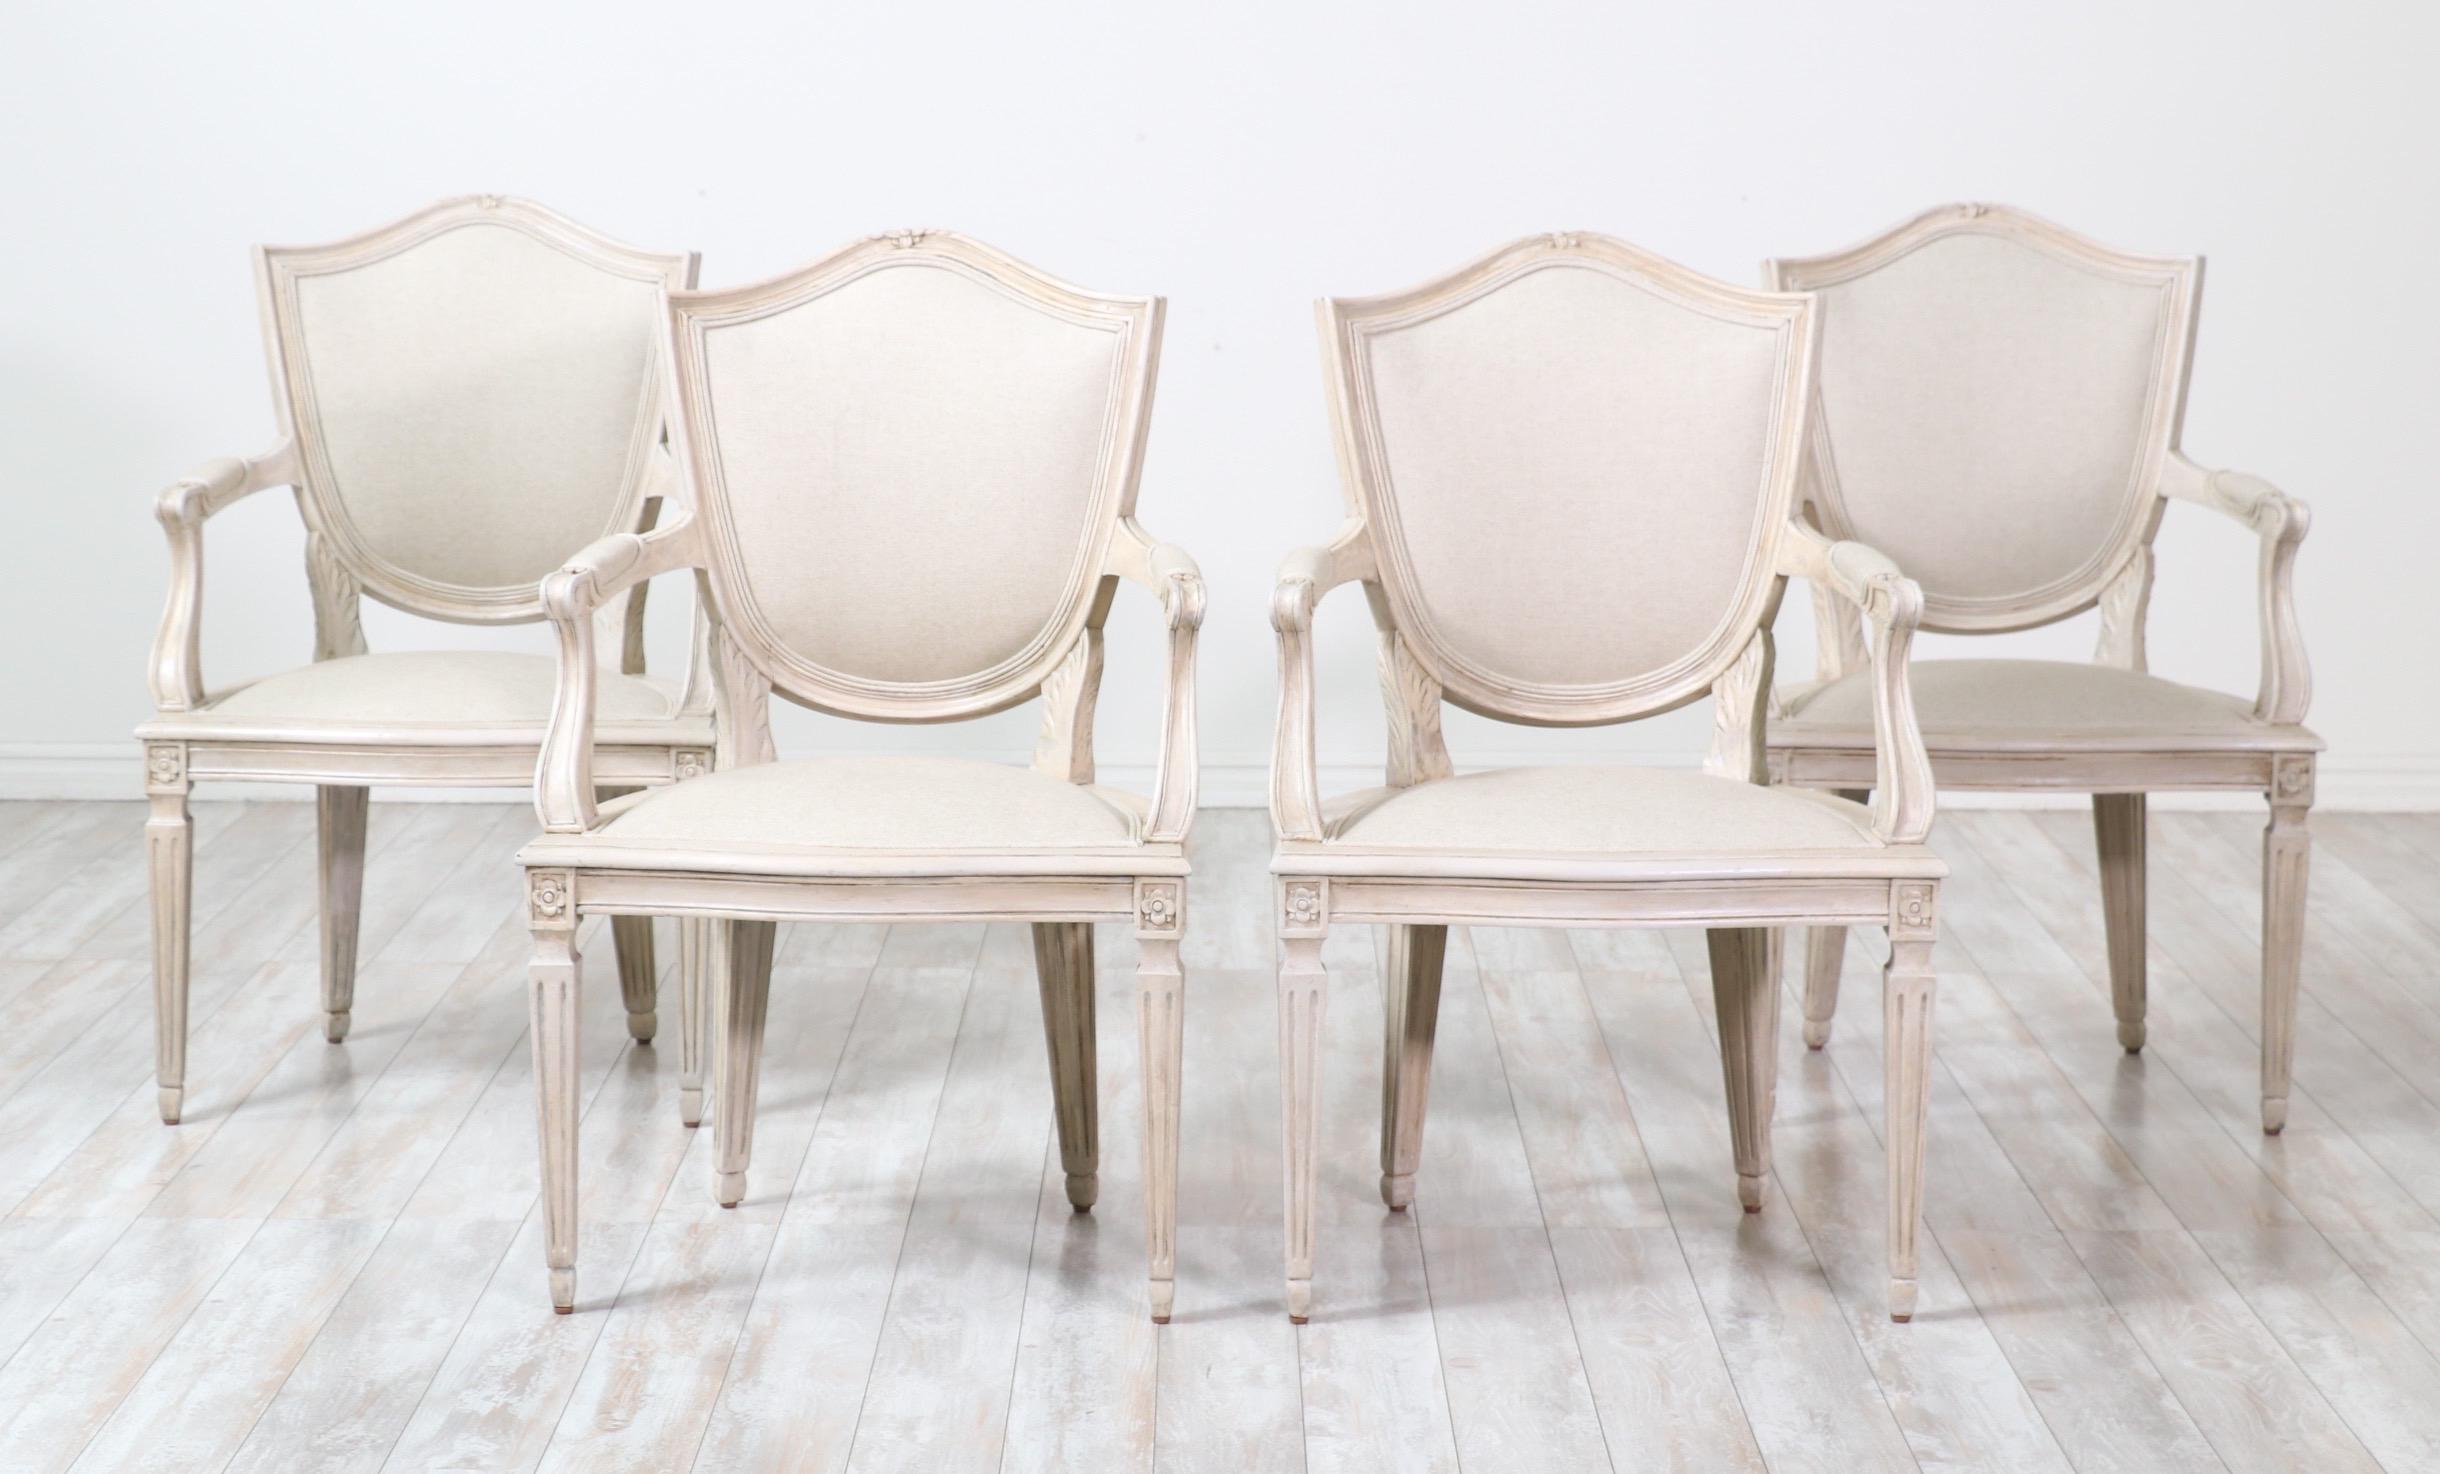 Beautiful, 1940s French set of four painted armchair in the Neoclassical style.

Each chair consists of an elegantly carved wood frame with a distressed greige paint finish and has been newly upholstered in a cotton linen canvas textile. 

The